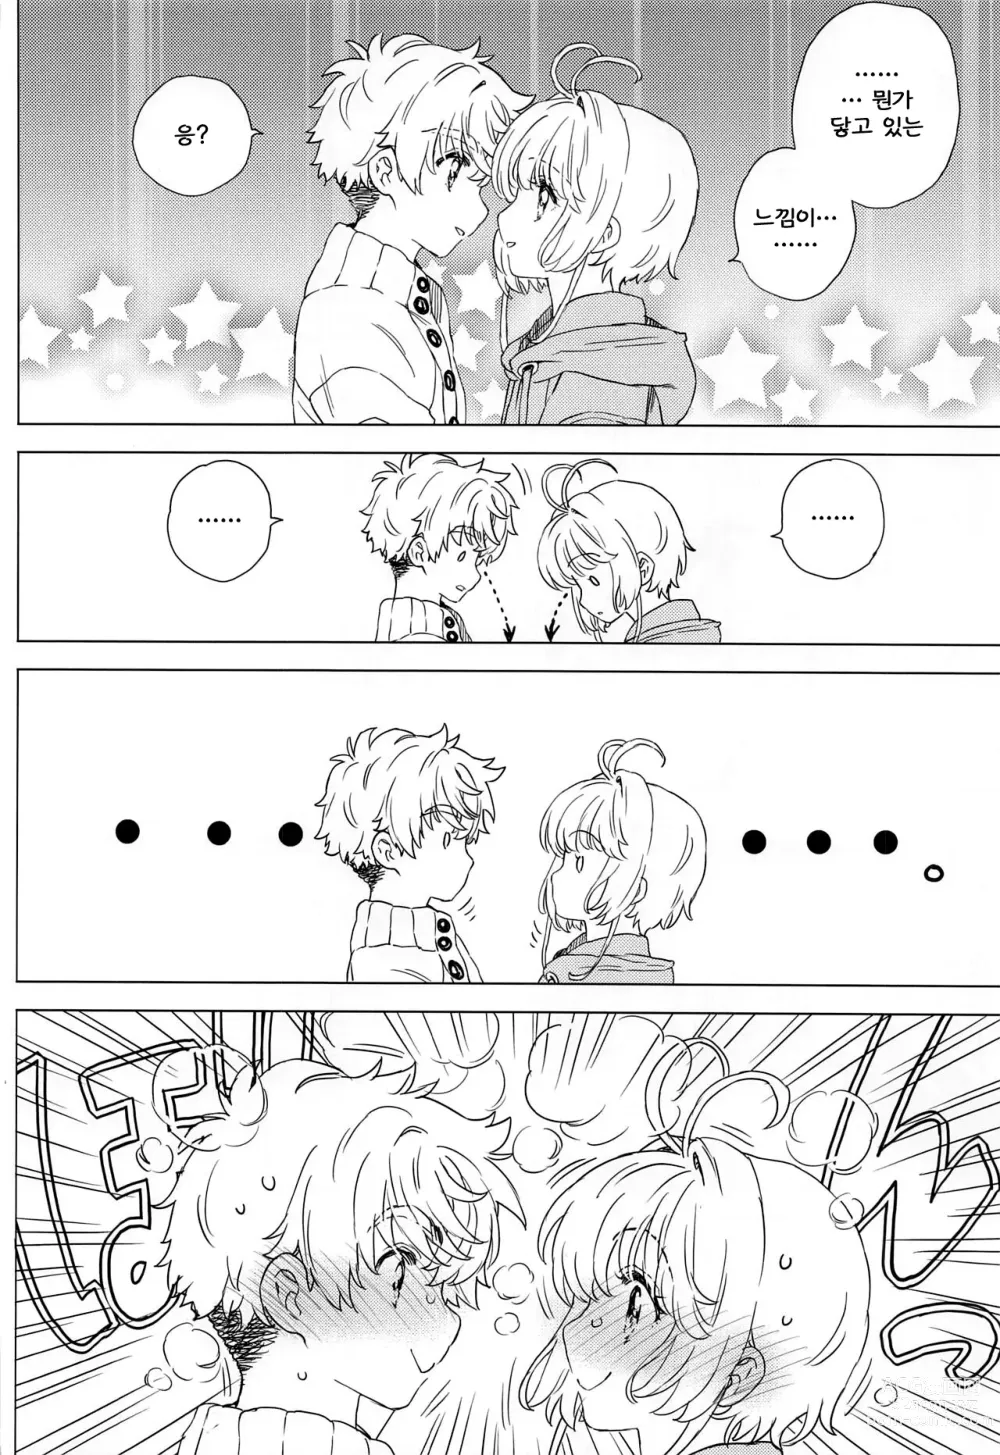 Page 11 of doujinshi 사쿠라와 샤오랑의 집 데이트